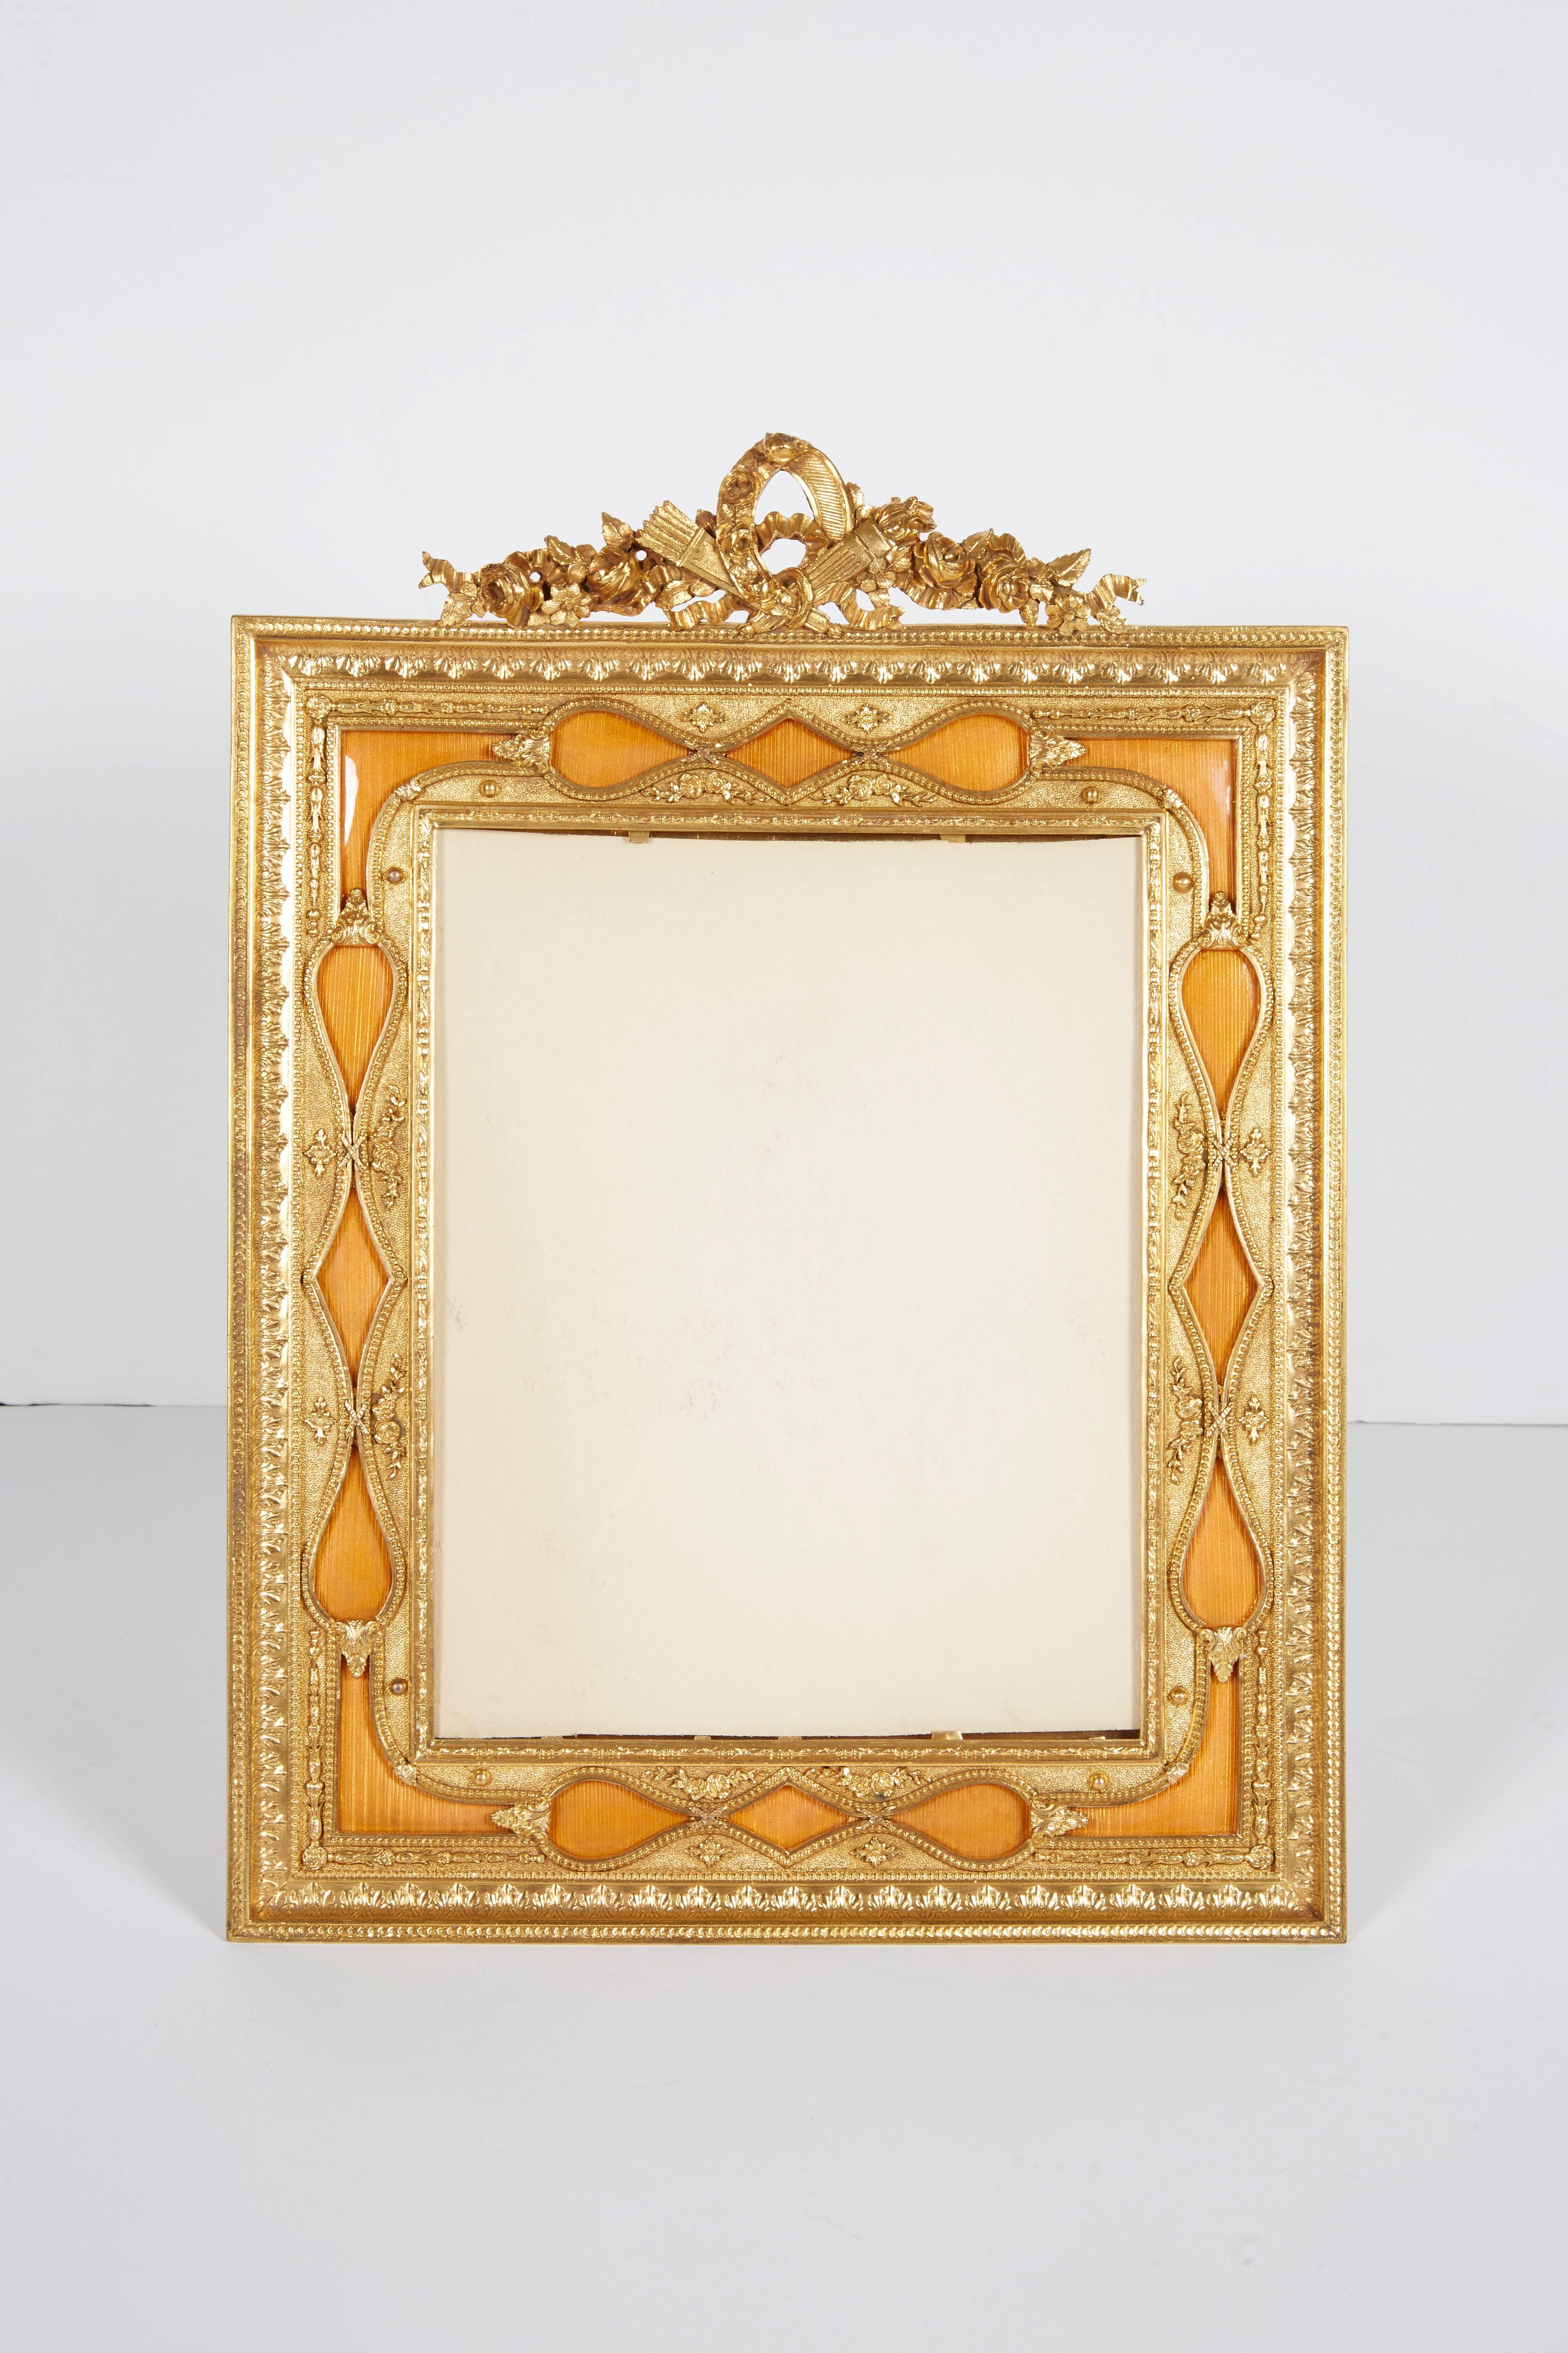 A large French gilt bronze ormolu and orange guilloche enamel picture photo frame, 19th century.

Frame size: 16 x 11 inches.

Excellent condition.

Ready for use.